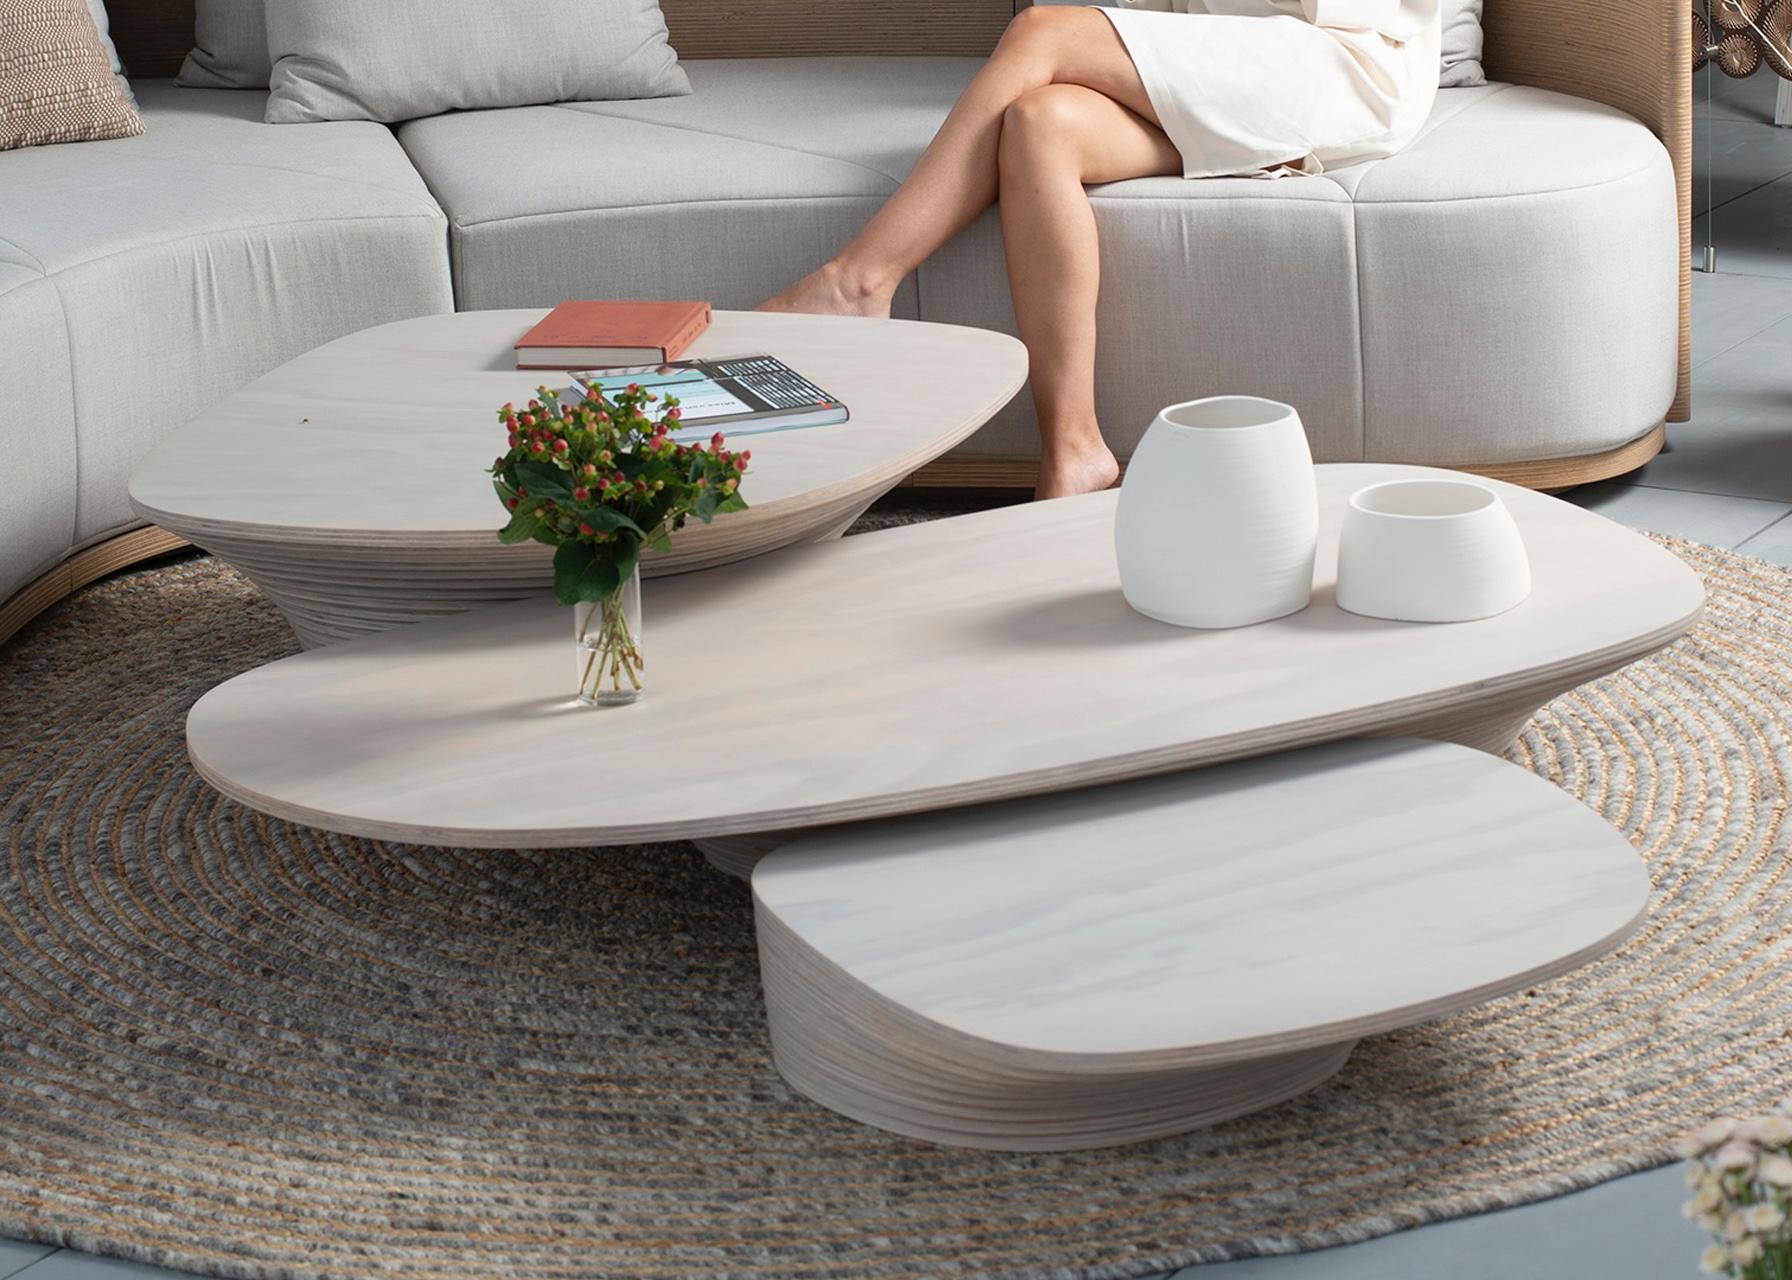 Laminated Vortex Medium Table by Piegatto, a Sculptural Coffee Table For Sale